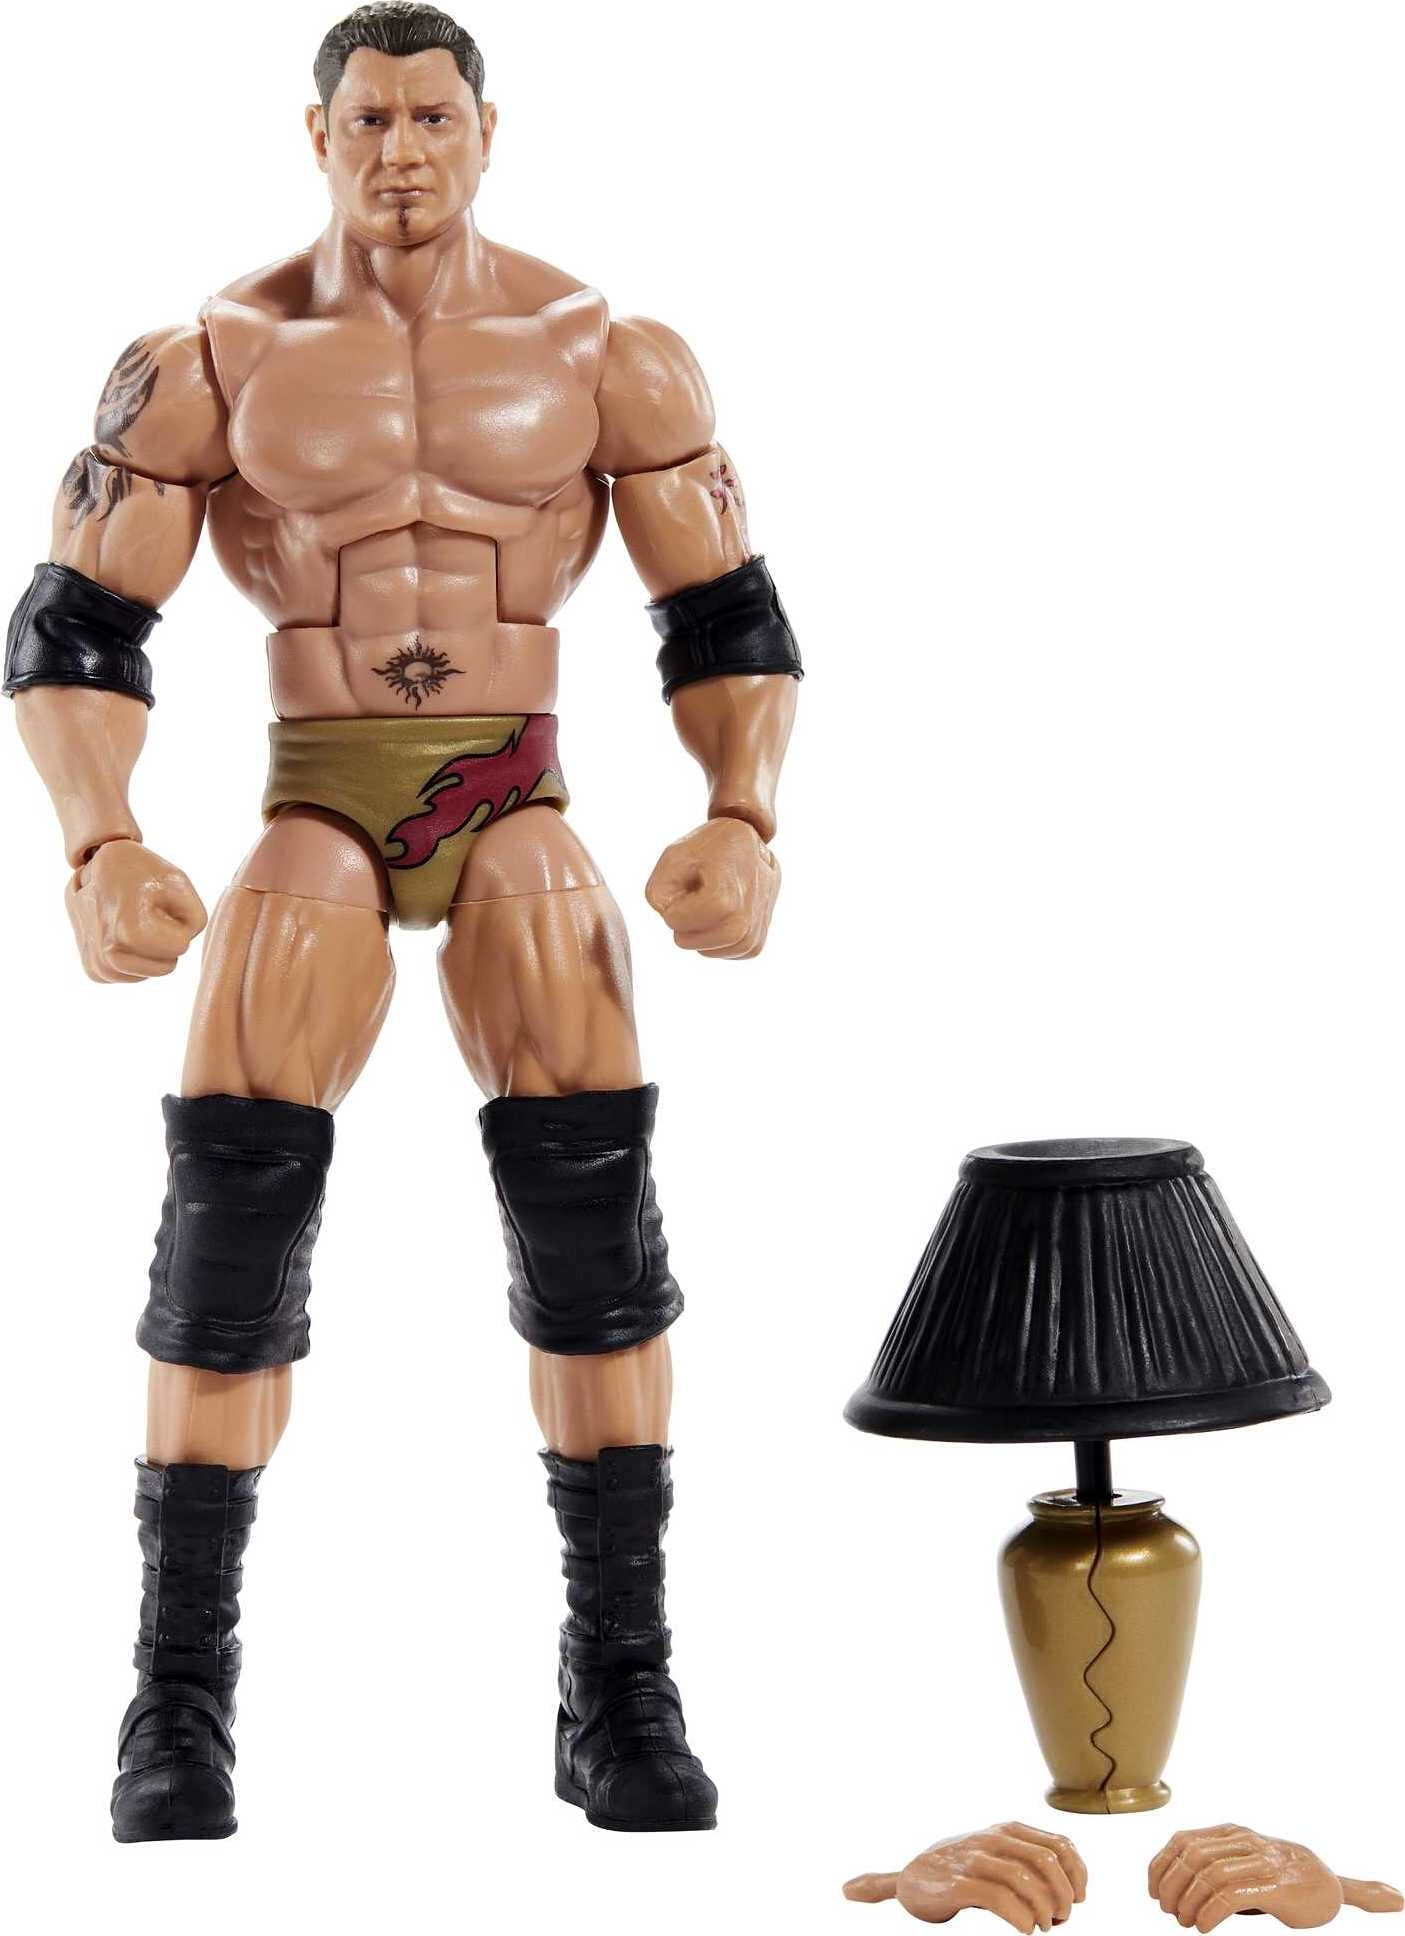 WWE Ruthless Aggression Elite Collection Action Figures with Accessories  (6-inch) (Styles May Vary)